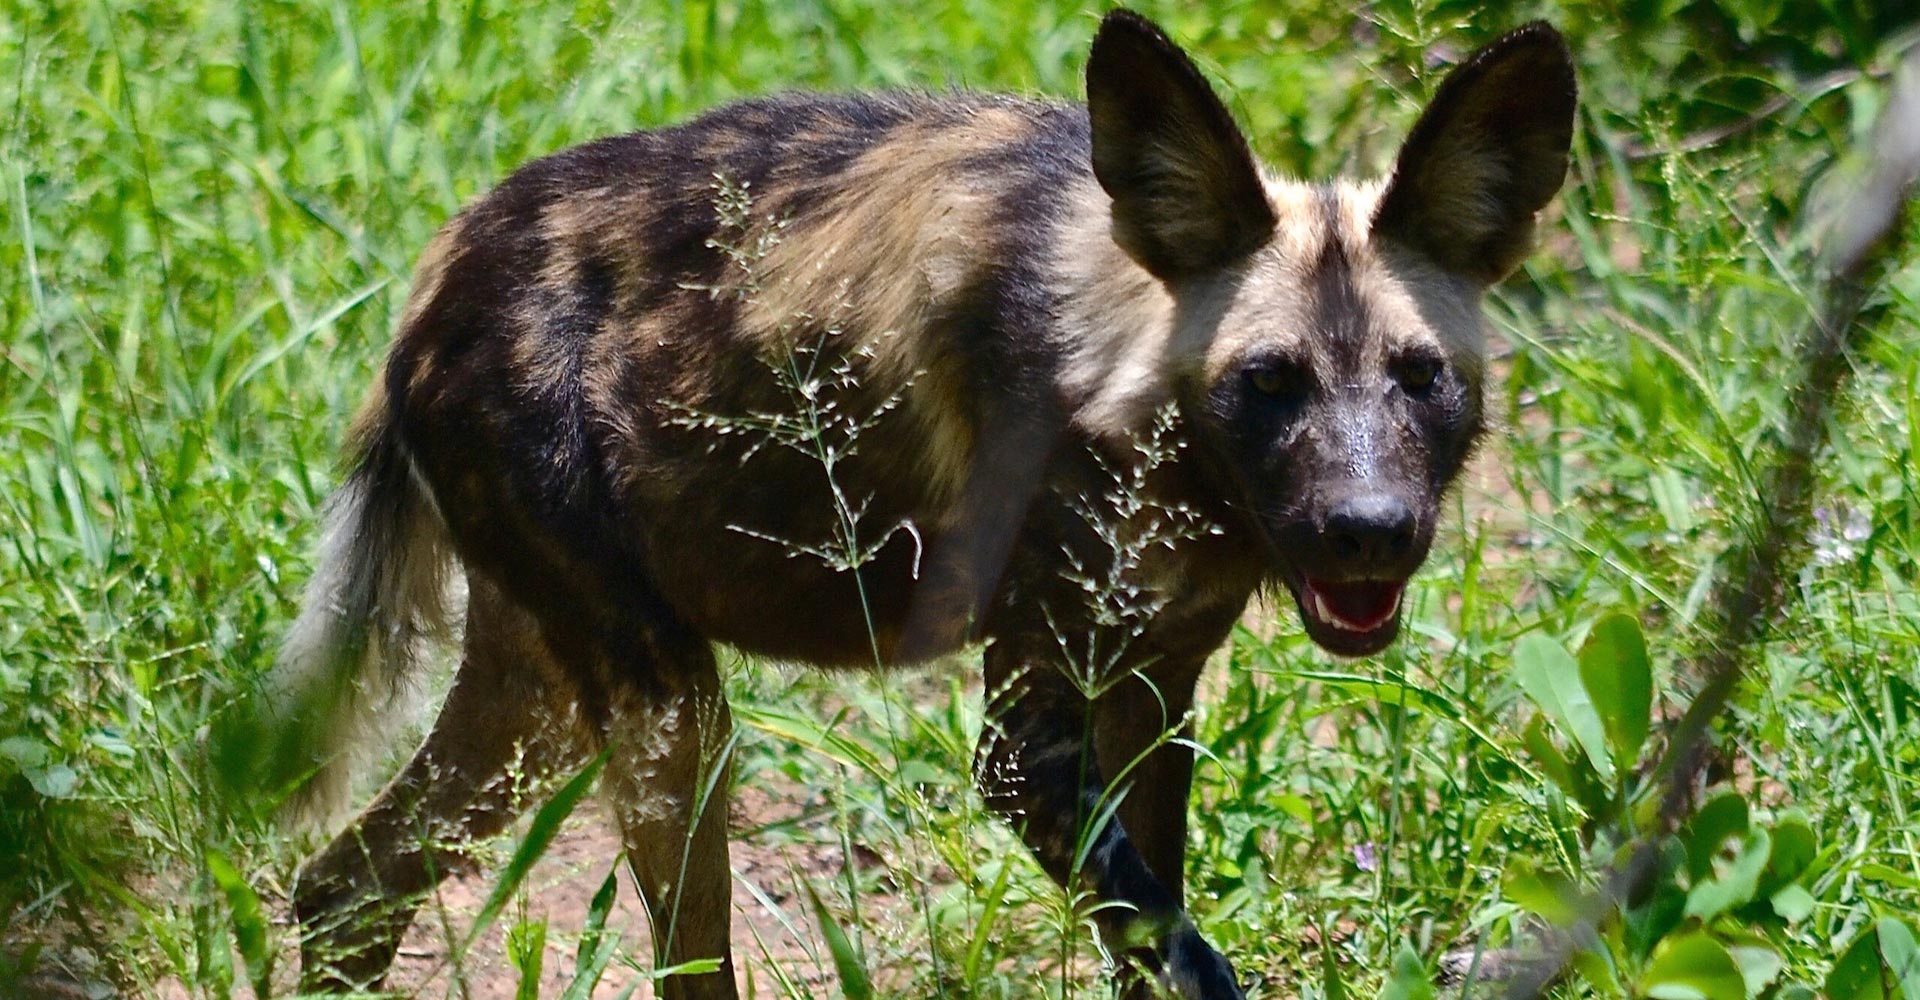 Picture Perfect - African Wild Dog Photography - Ben Leigh Photography - Conjour Wildlife Photography Feature - Feature Image